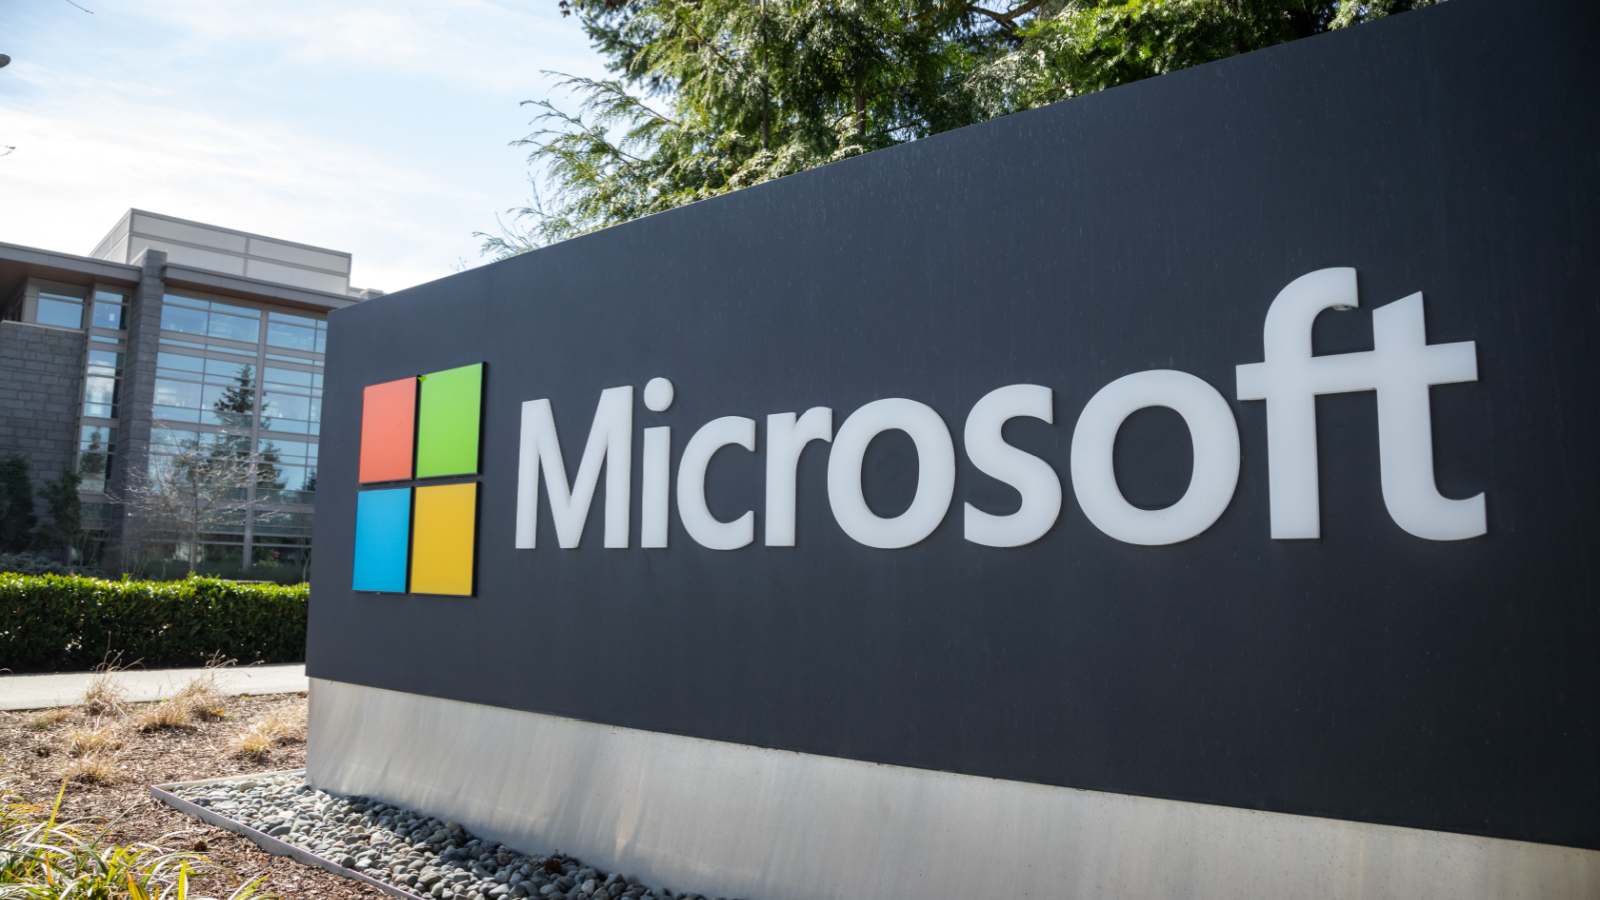 Microsoft Stock: The Value Play Set to Double Again in 21 Months